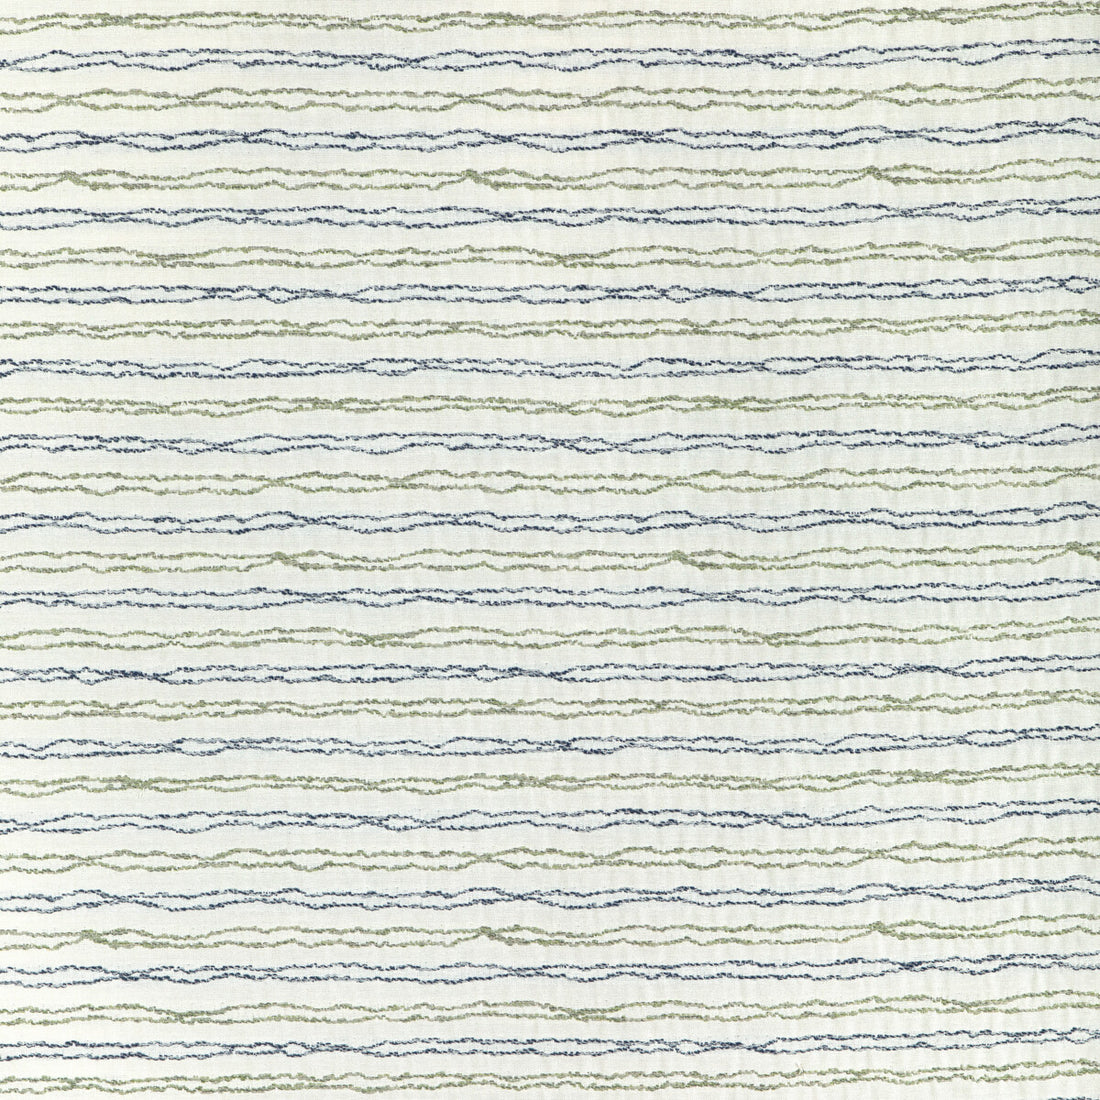 Wave Length fabric in meadow color - pattern 37057.51.0 - by Kravet Design in the Thom Filicia Latitude collection